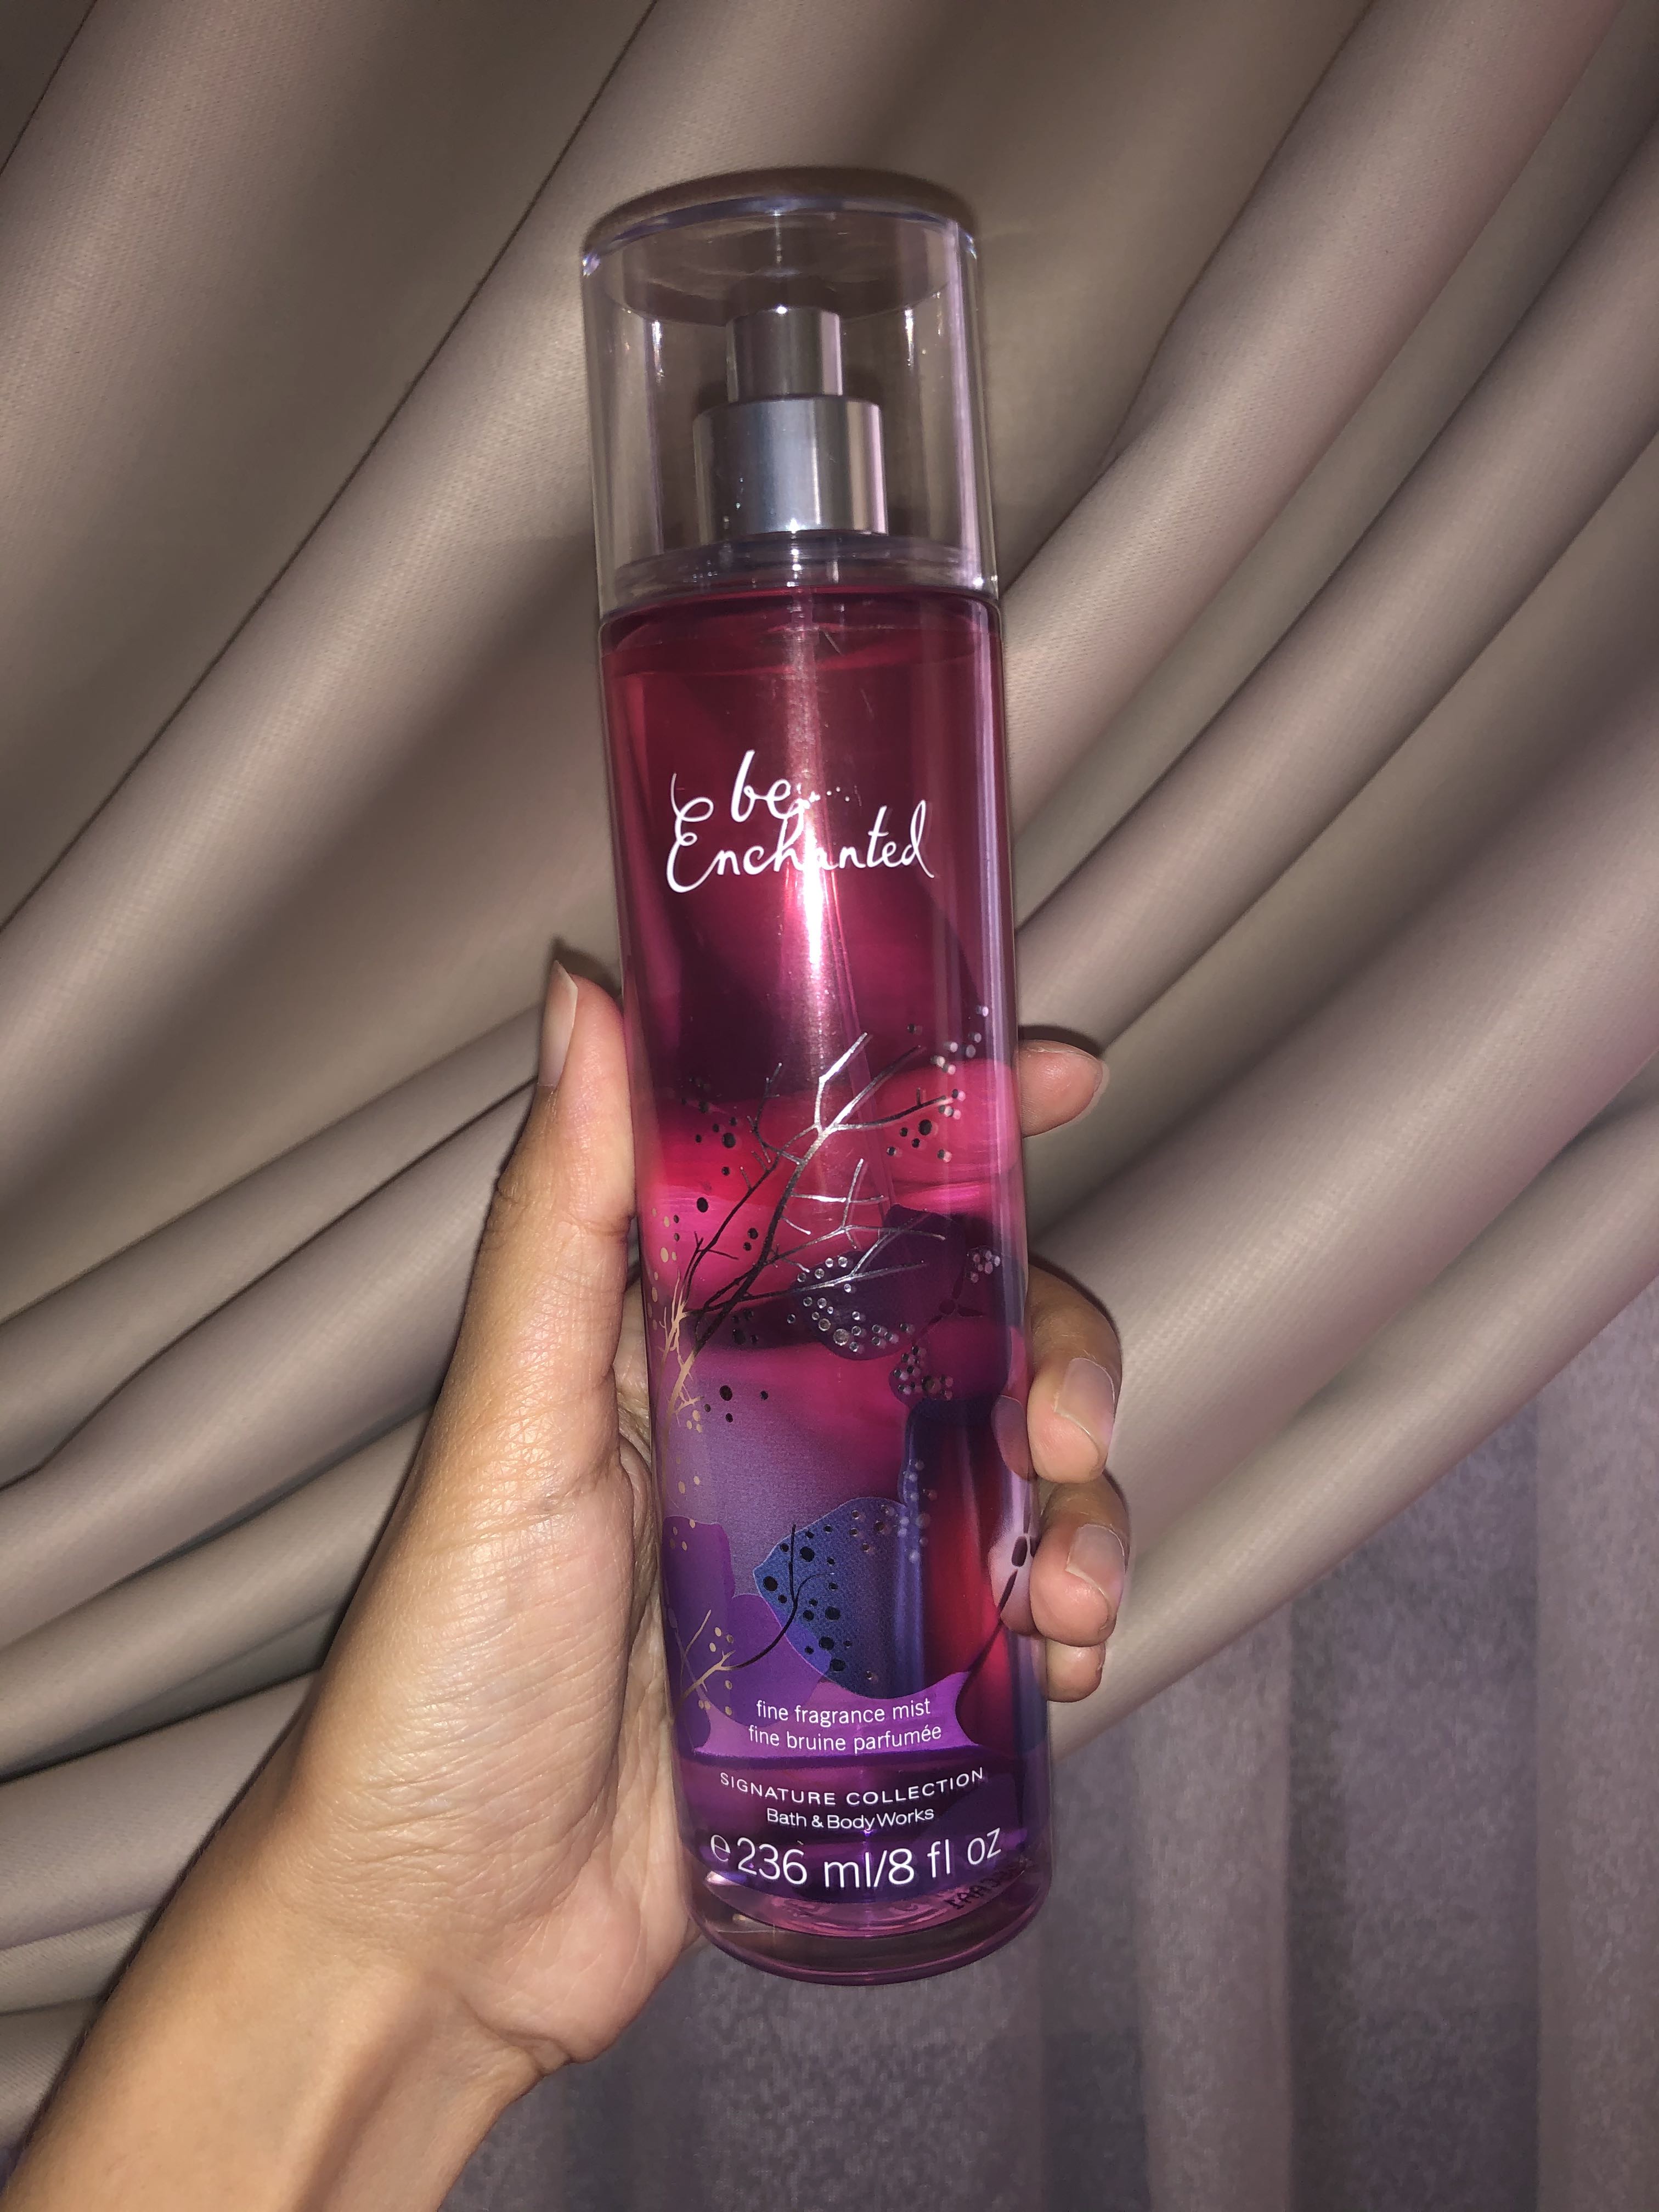 SIGNATURE COLLECTION Bath  Body Works